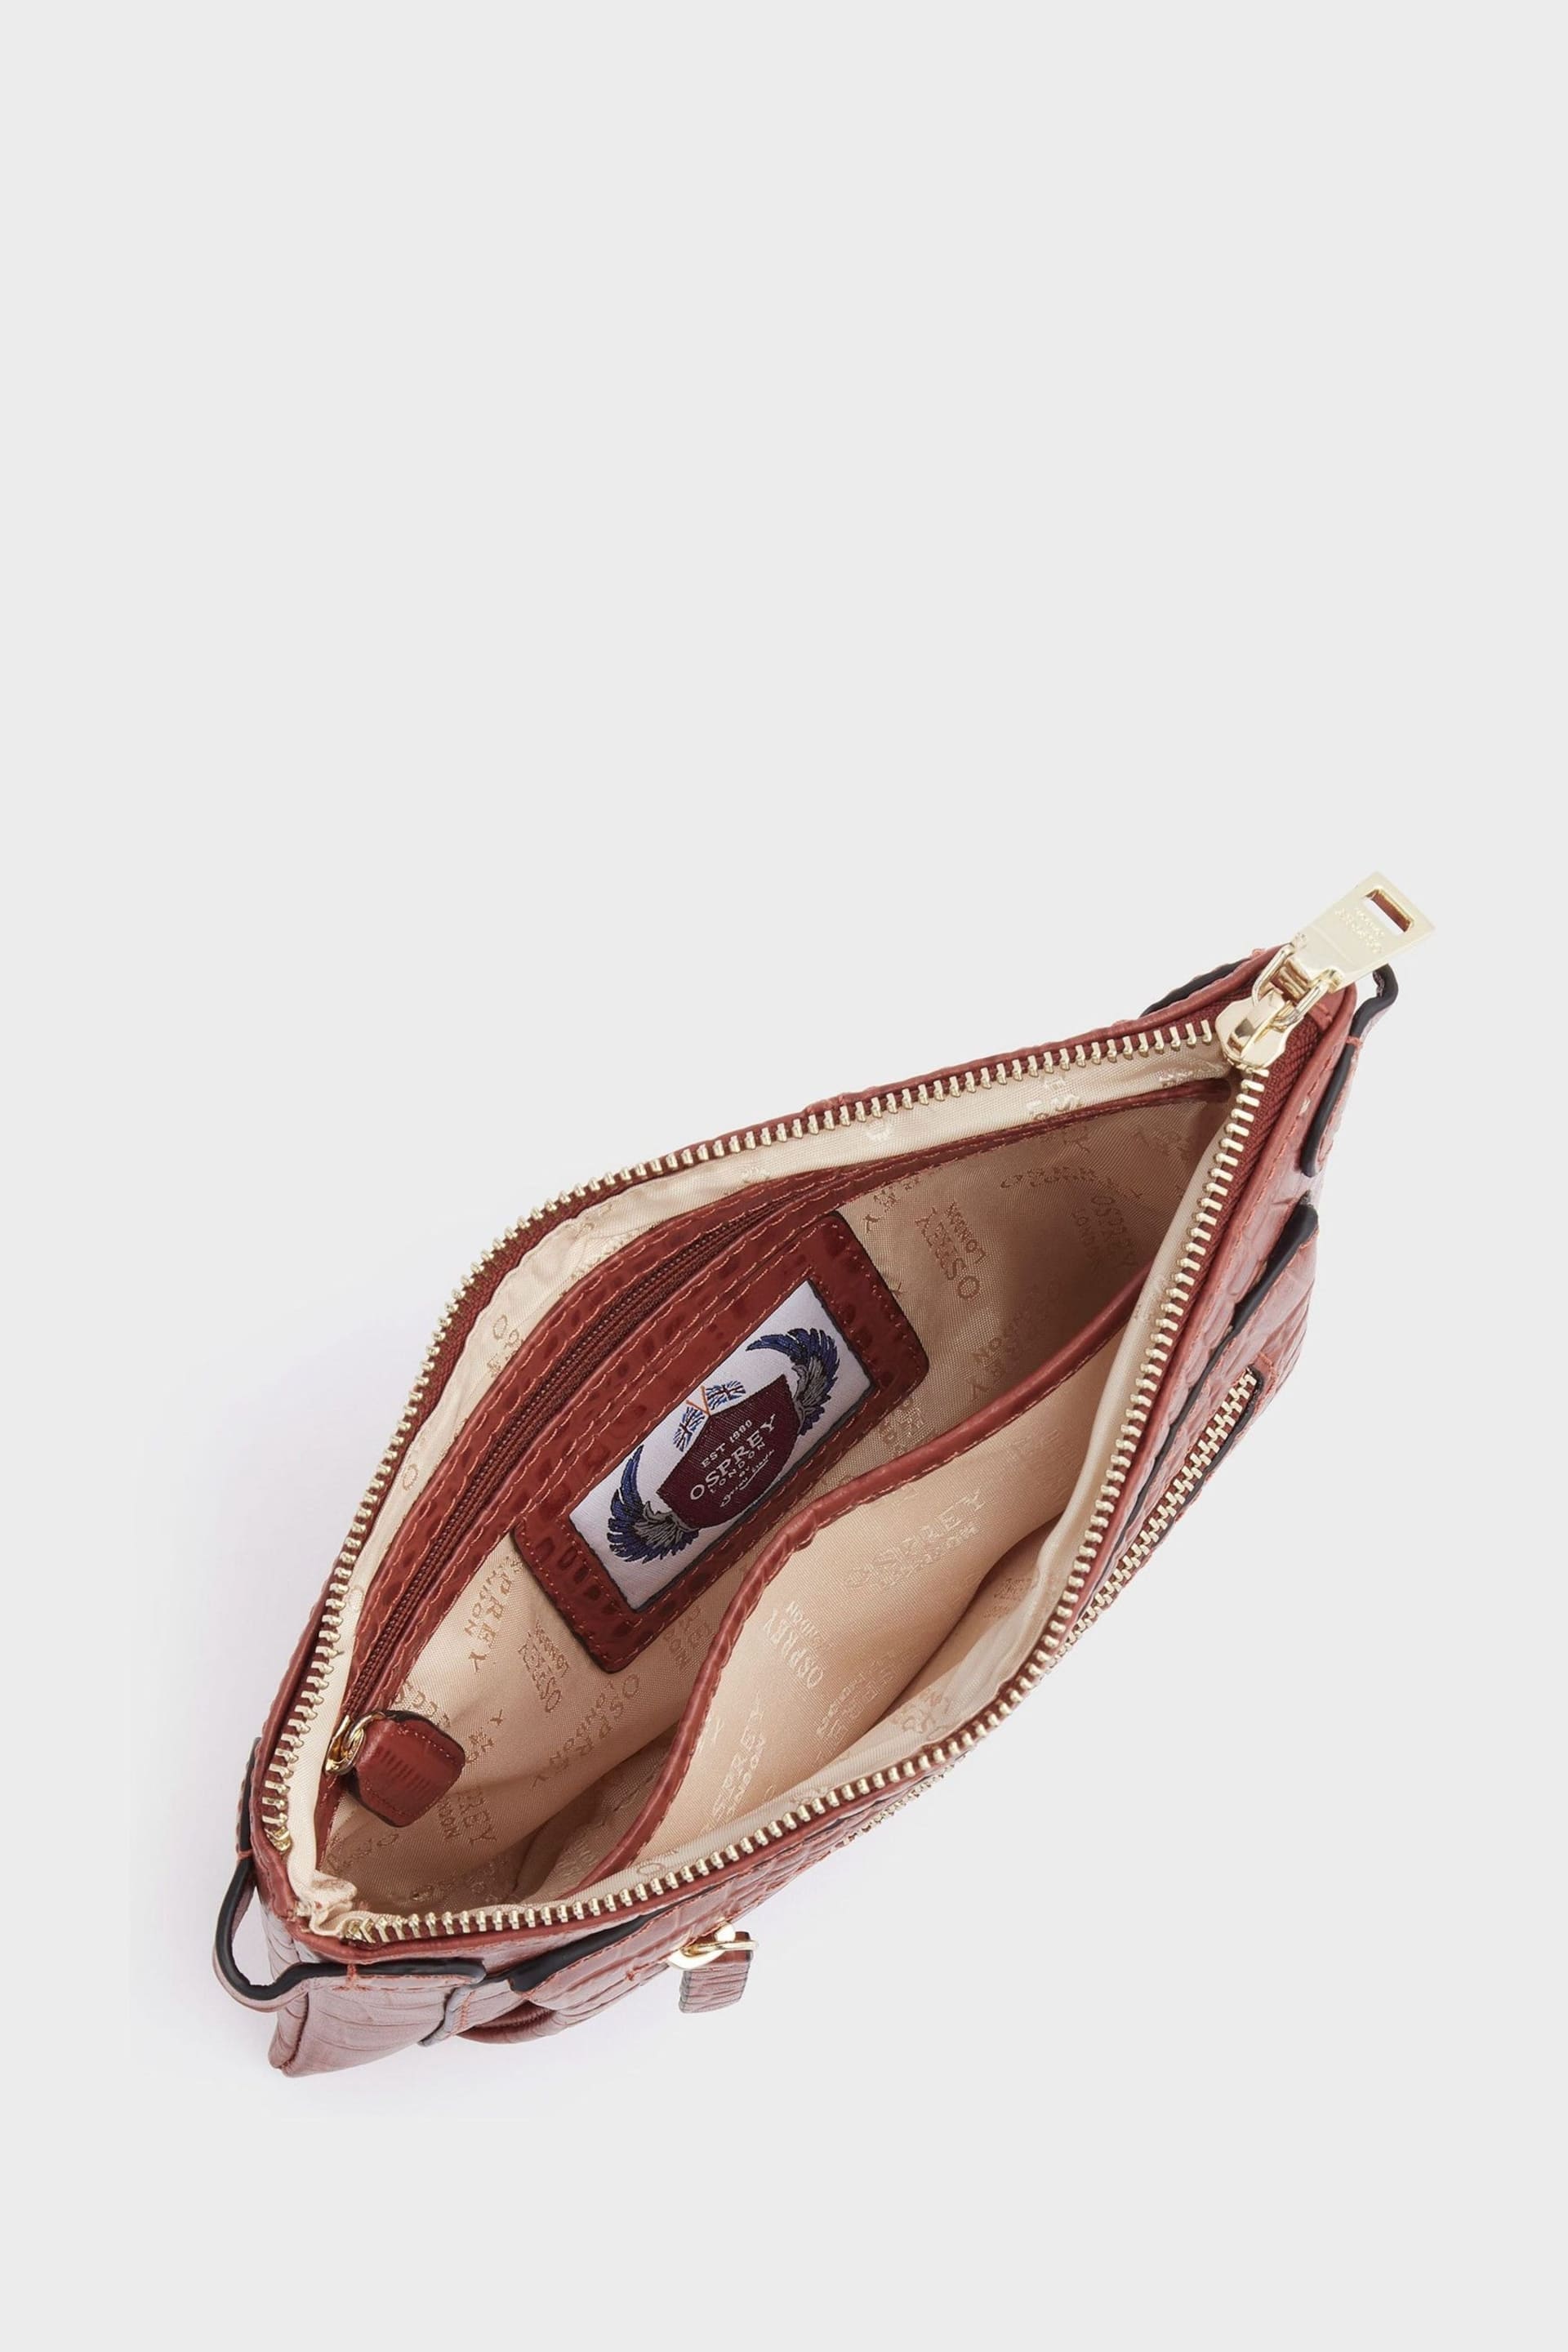 Osprey London  The Ruby Leather Cross-Body Cognac Clutch - Image 3 of 6